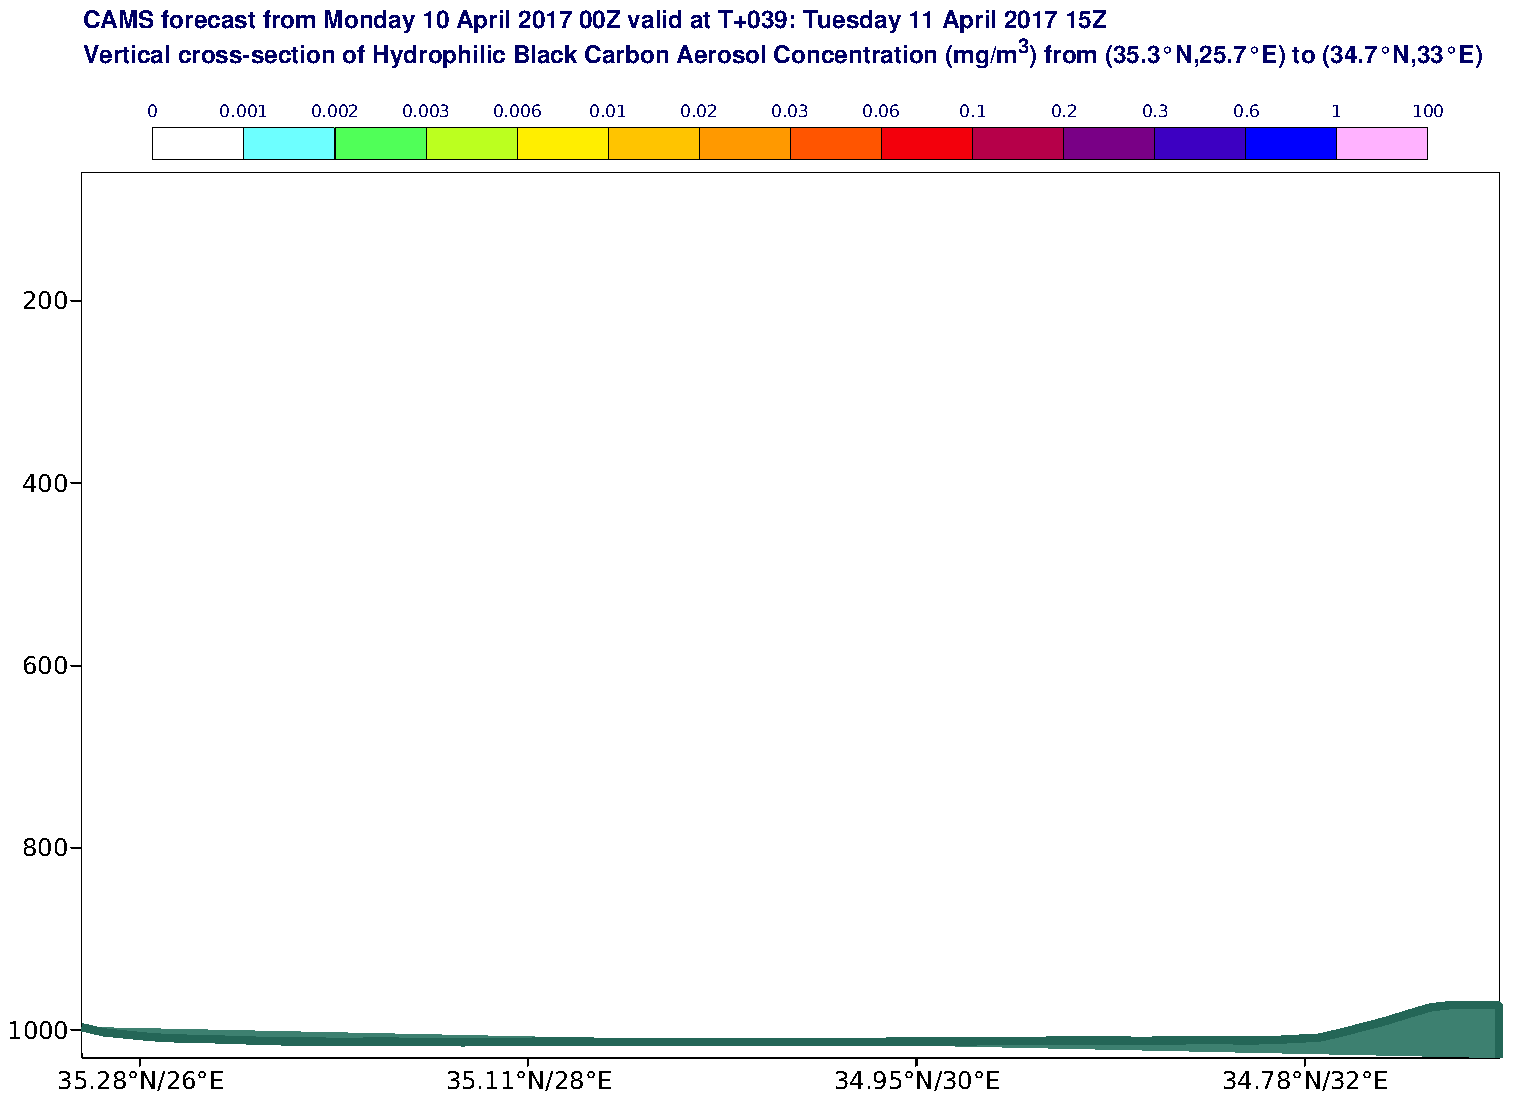 Vertical cross-section of Hydrophilic Black Carbon Aerosol Concentration (mg/m3) valid at T39 - 2017-04-11 15:00